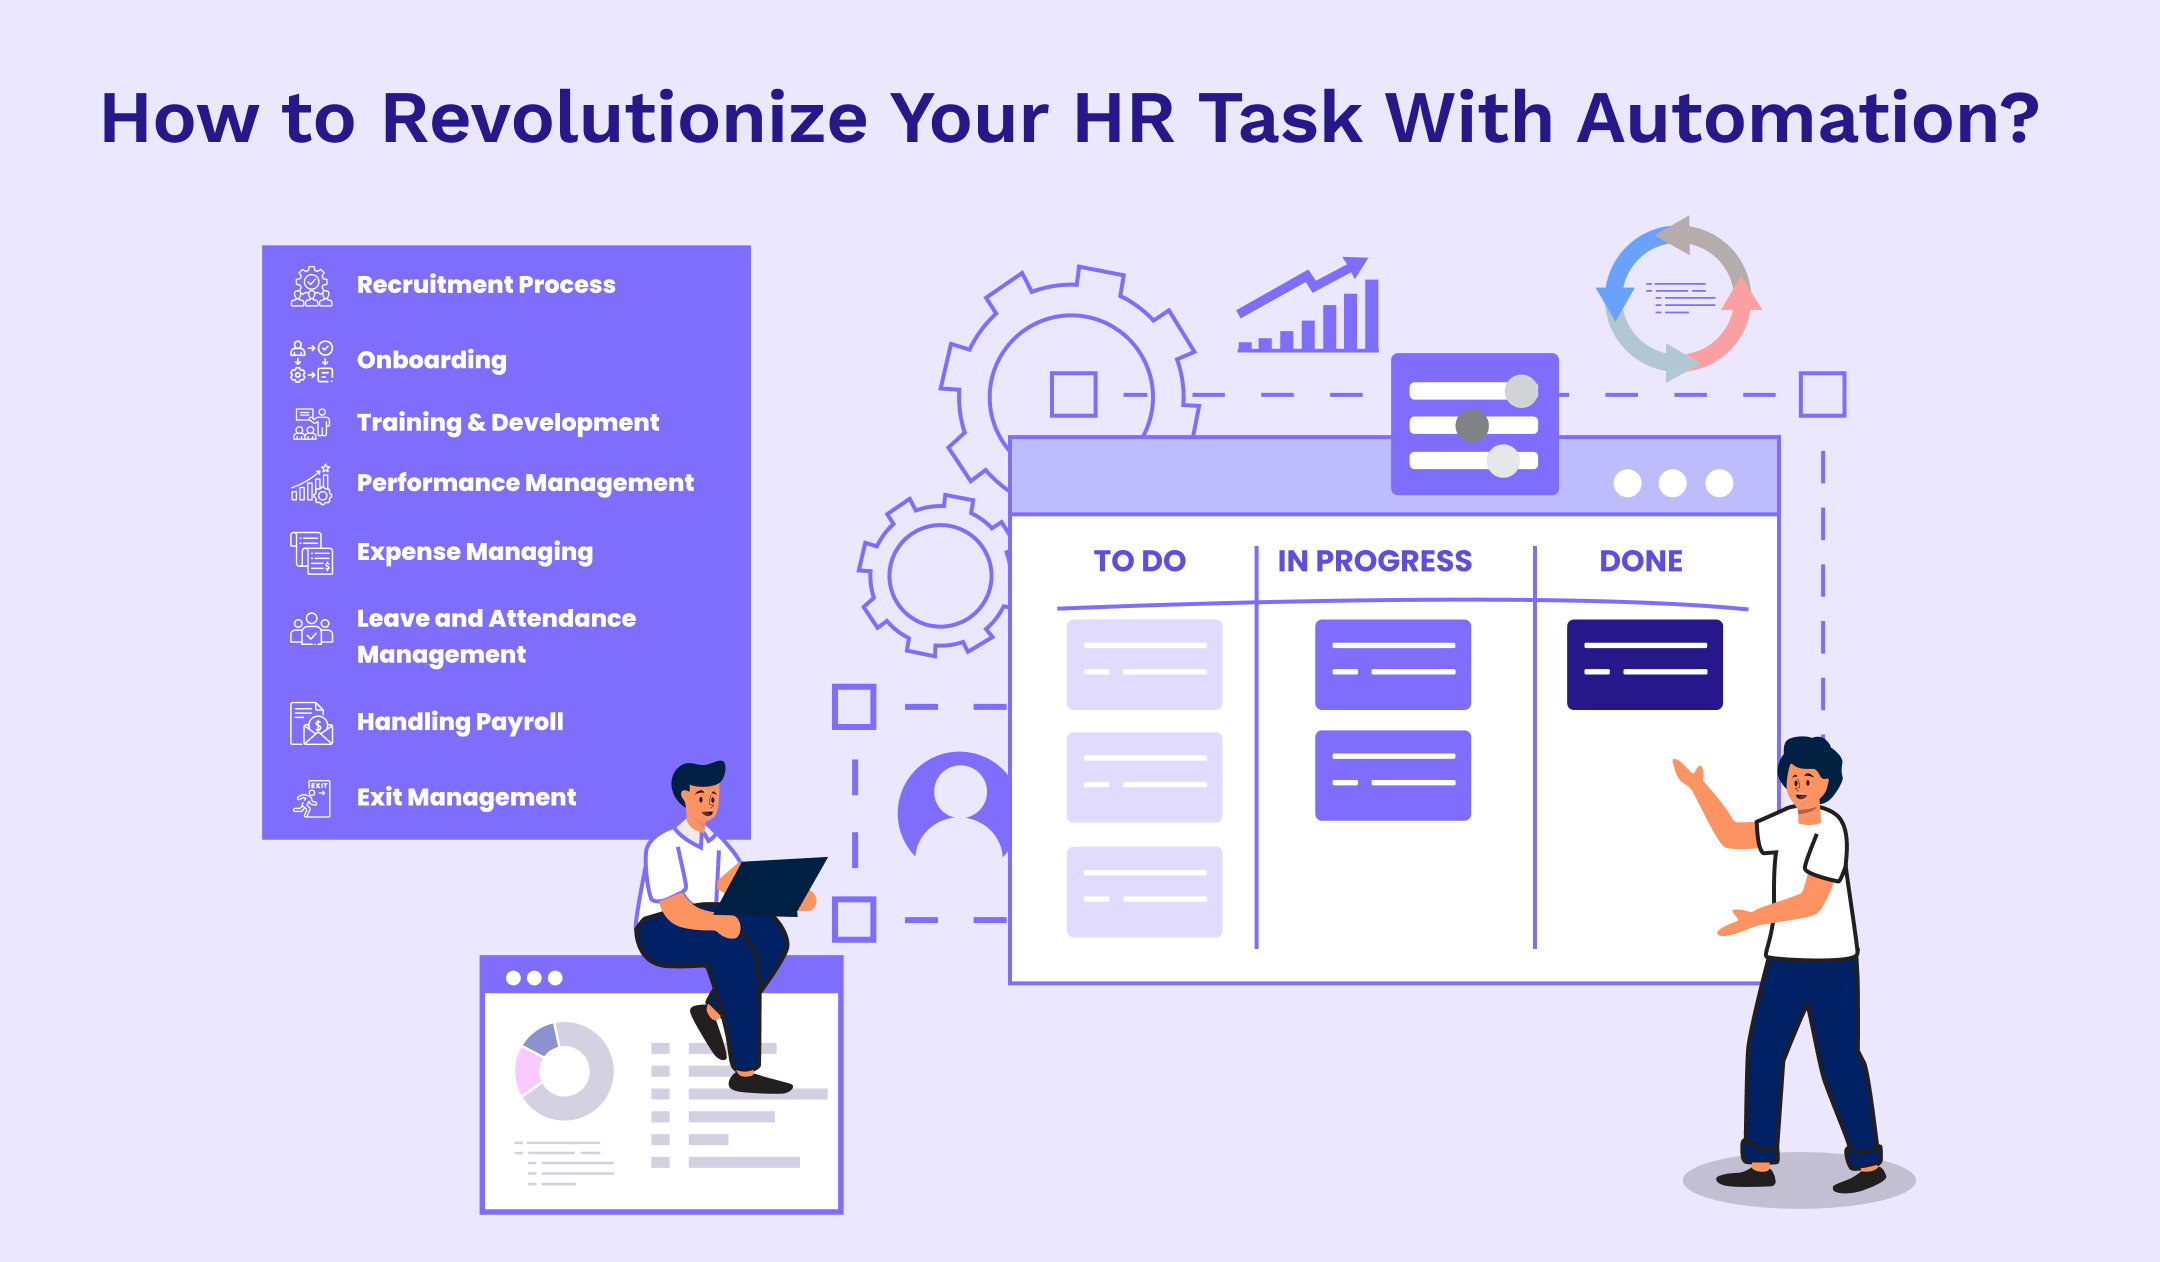 How to Revolutionize Your HR Tasks from Spreadsheets to Automation? 